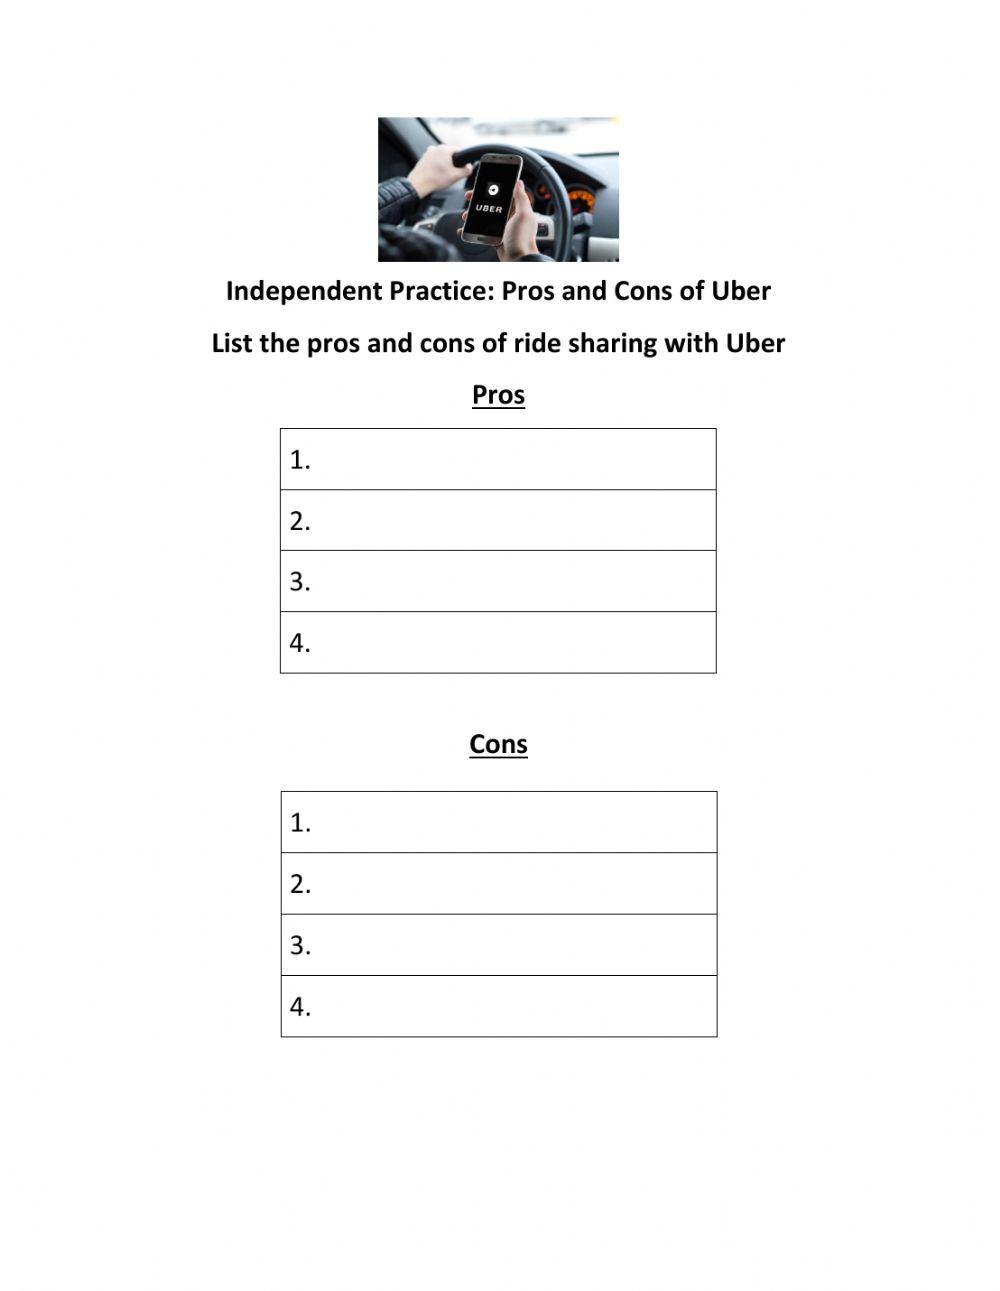 Independent Practice - Pros and Cons of Uber